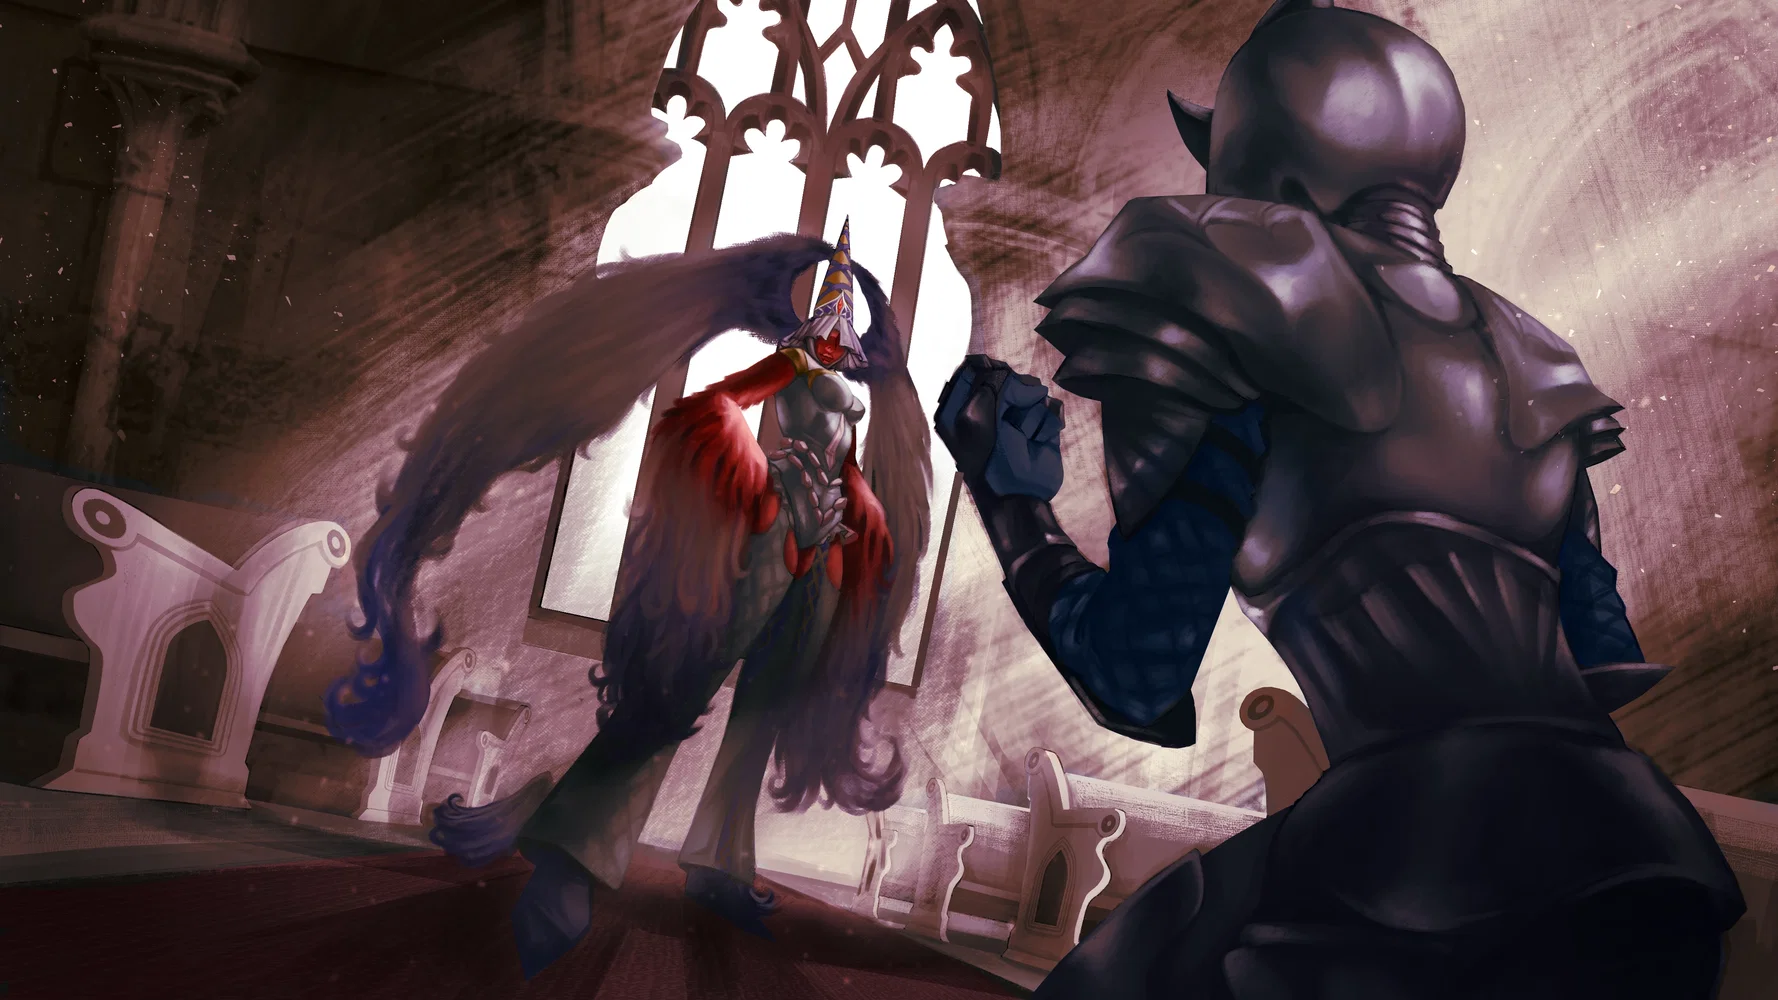 Keyframe of a tense, scene. One character in armor is in the foreground, pleading with the second. The second character is staring over in colorful garb and fiery red wings.